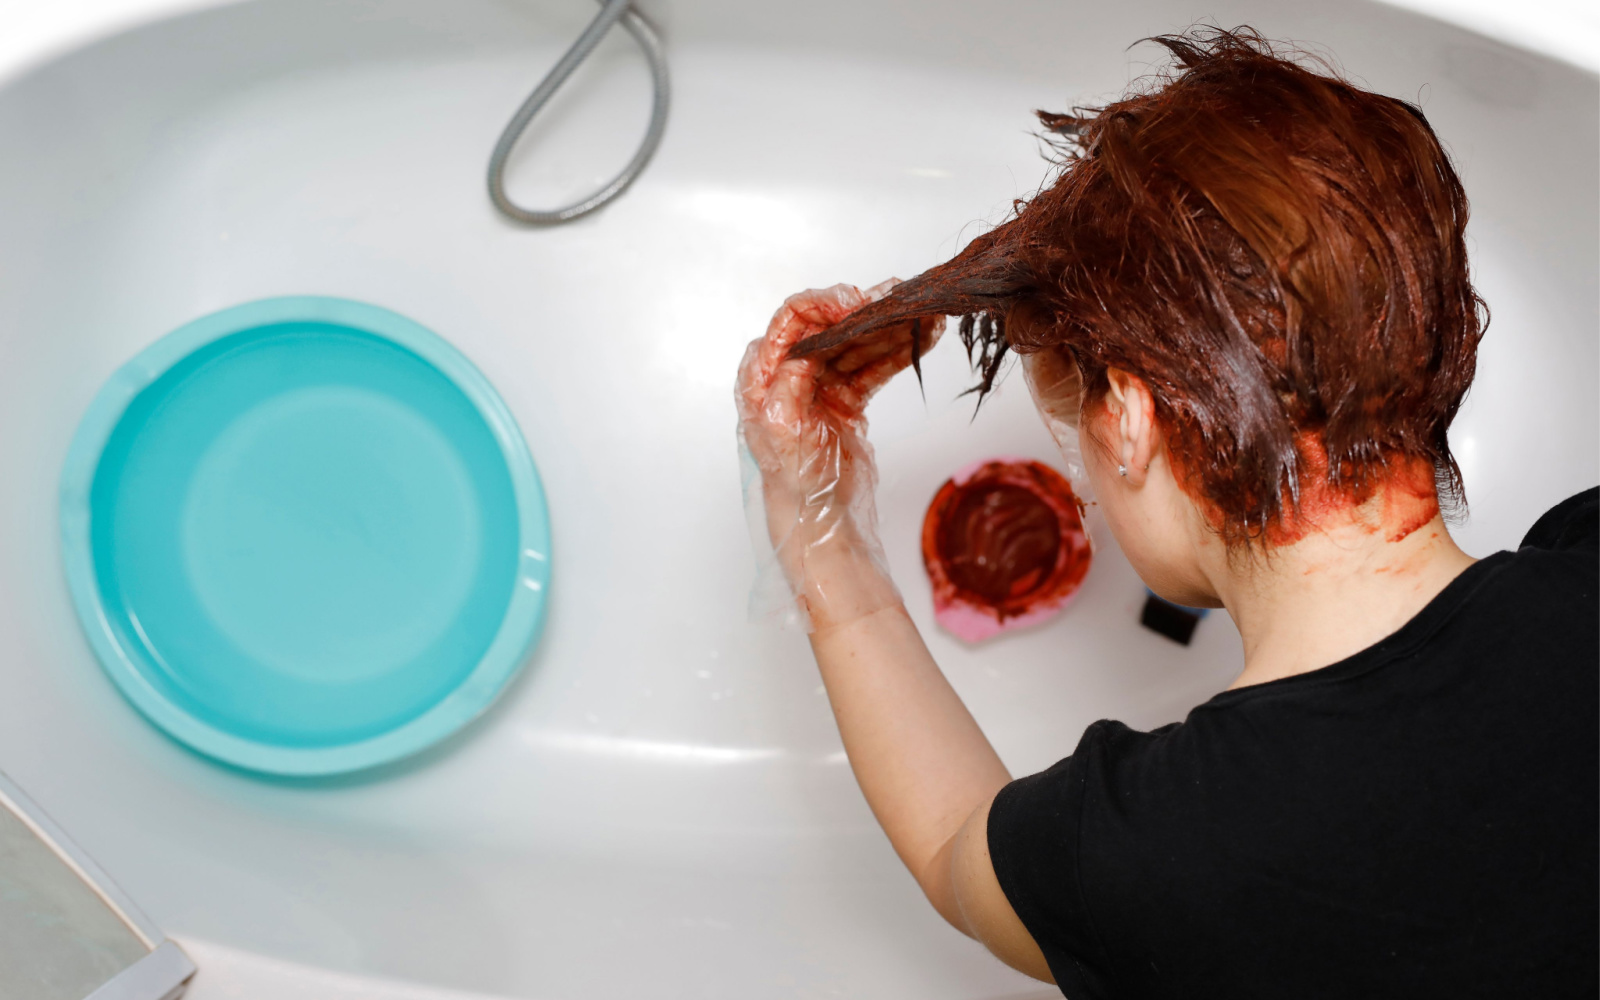 How to Stop Red Hair from Bleeding | Step-by-Step